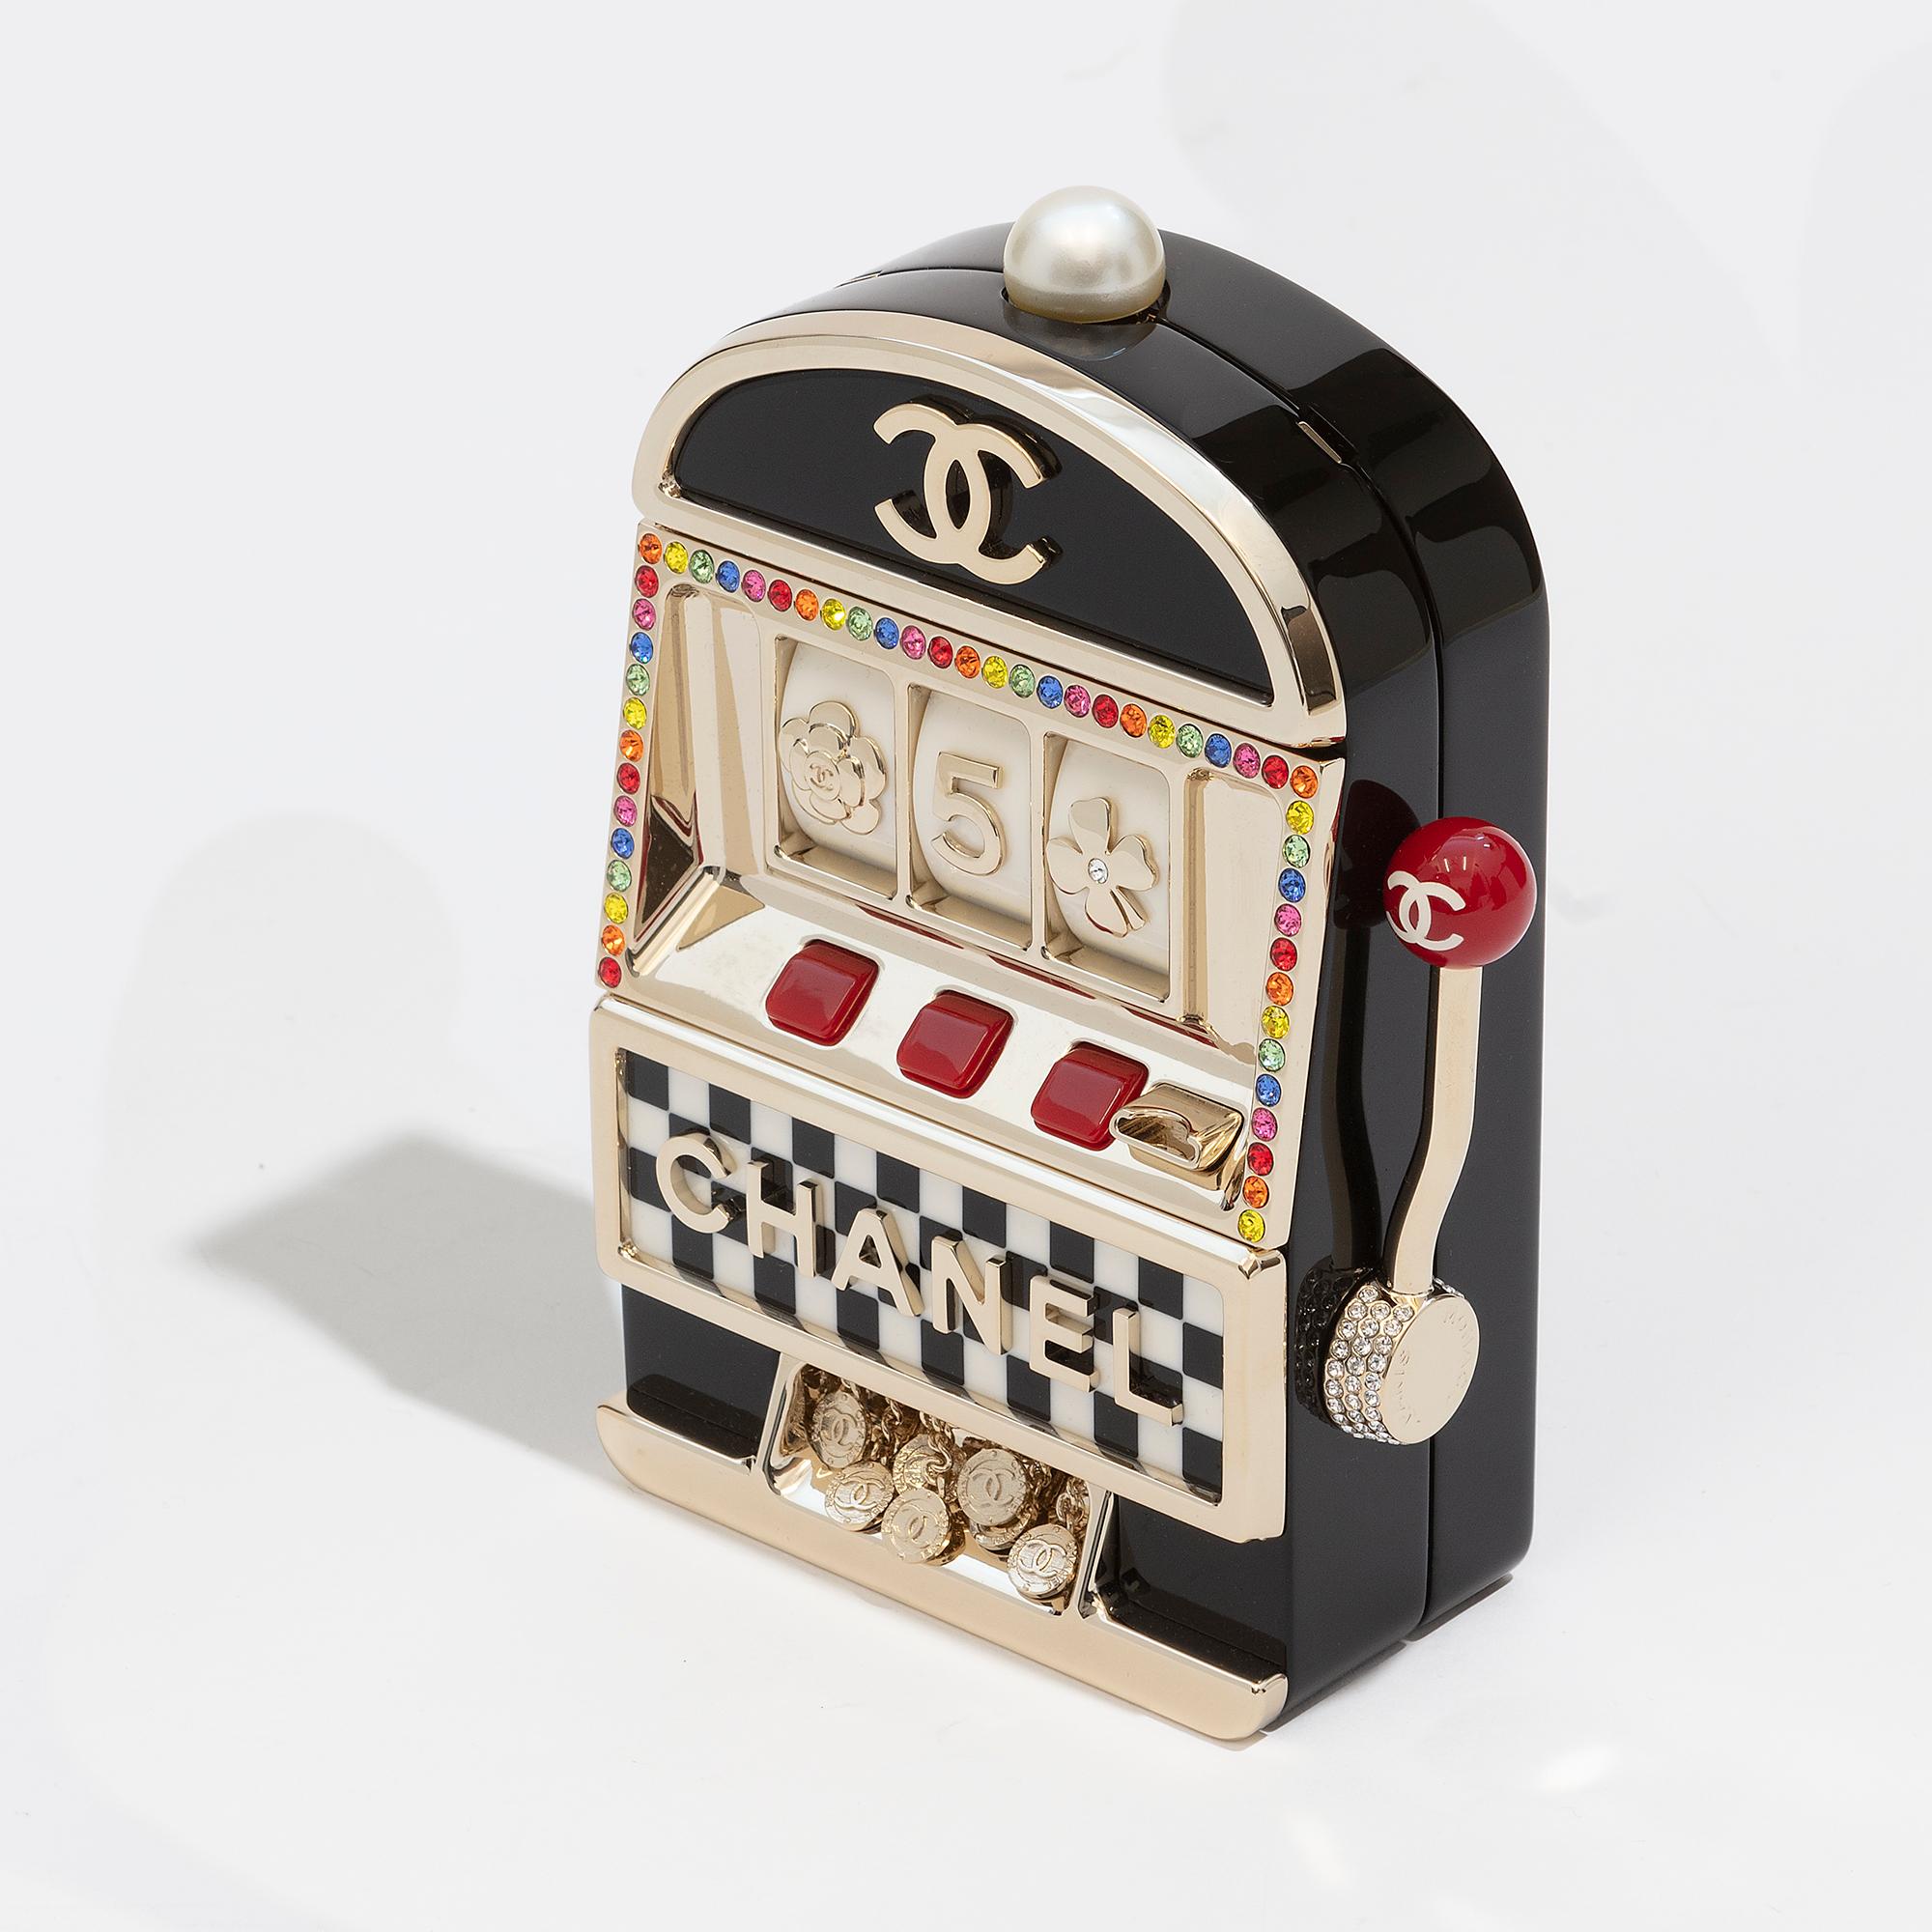 The Casino Minaudière Evening Clutch Bag from Chanel is an exclusive and highly sought-after piece from the 2023 Cruise collection. It boasts a slot machine design, rainbow crystals decoration, and gold hardware, and comes with a chain crossbody